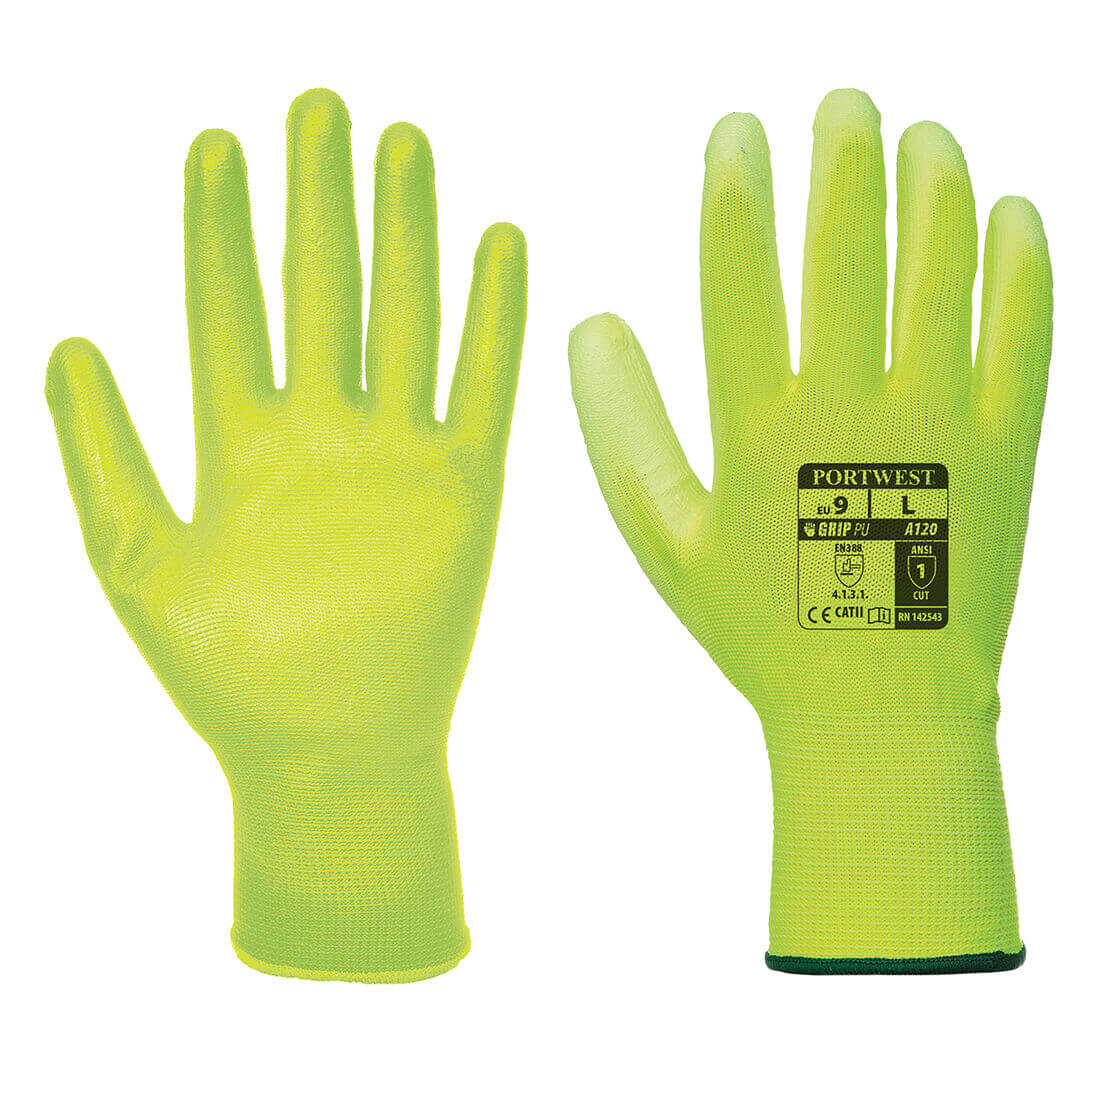 Image of Portwest PU Palm General Handling Grip Gloves Yellow XL